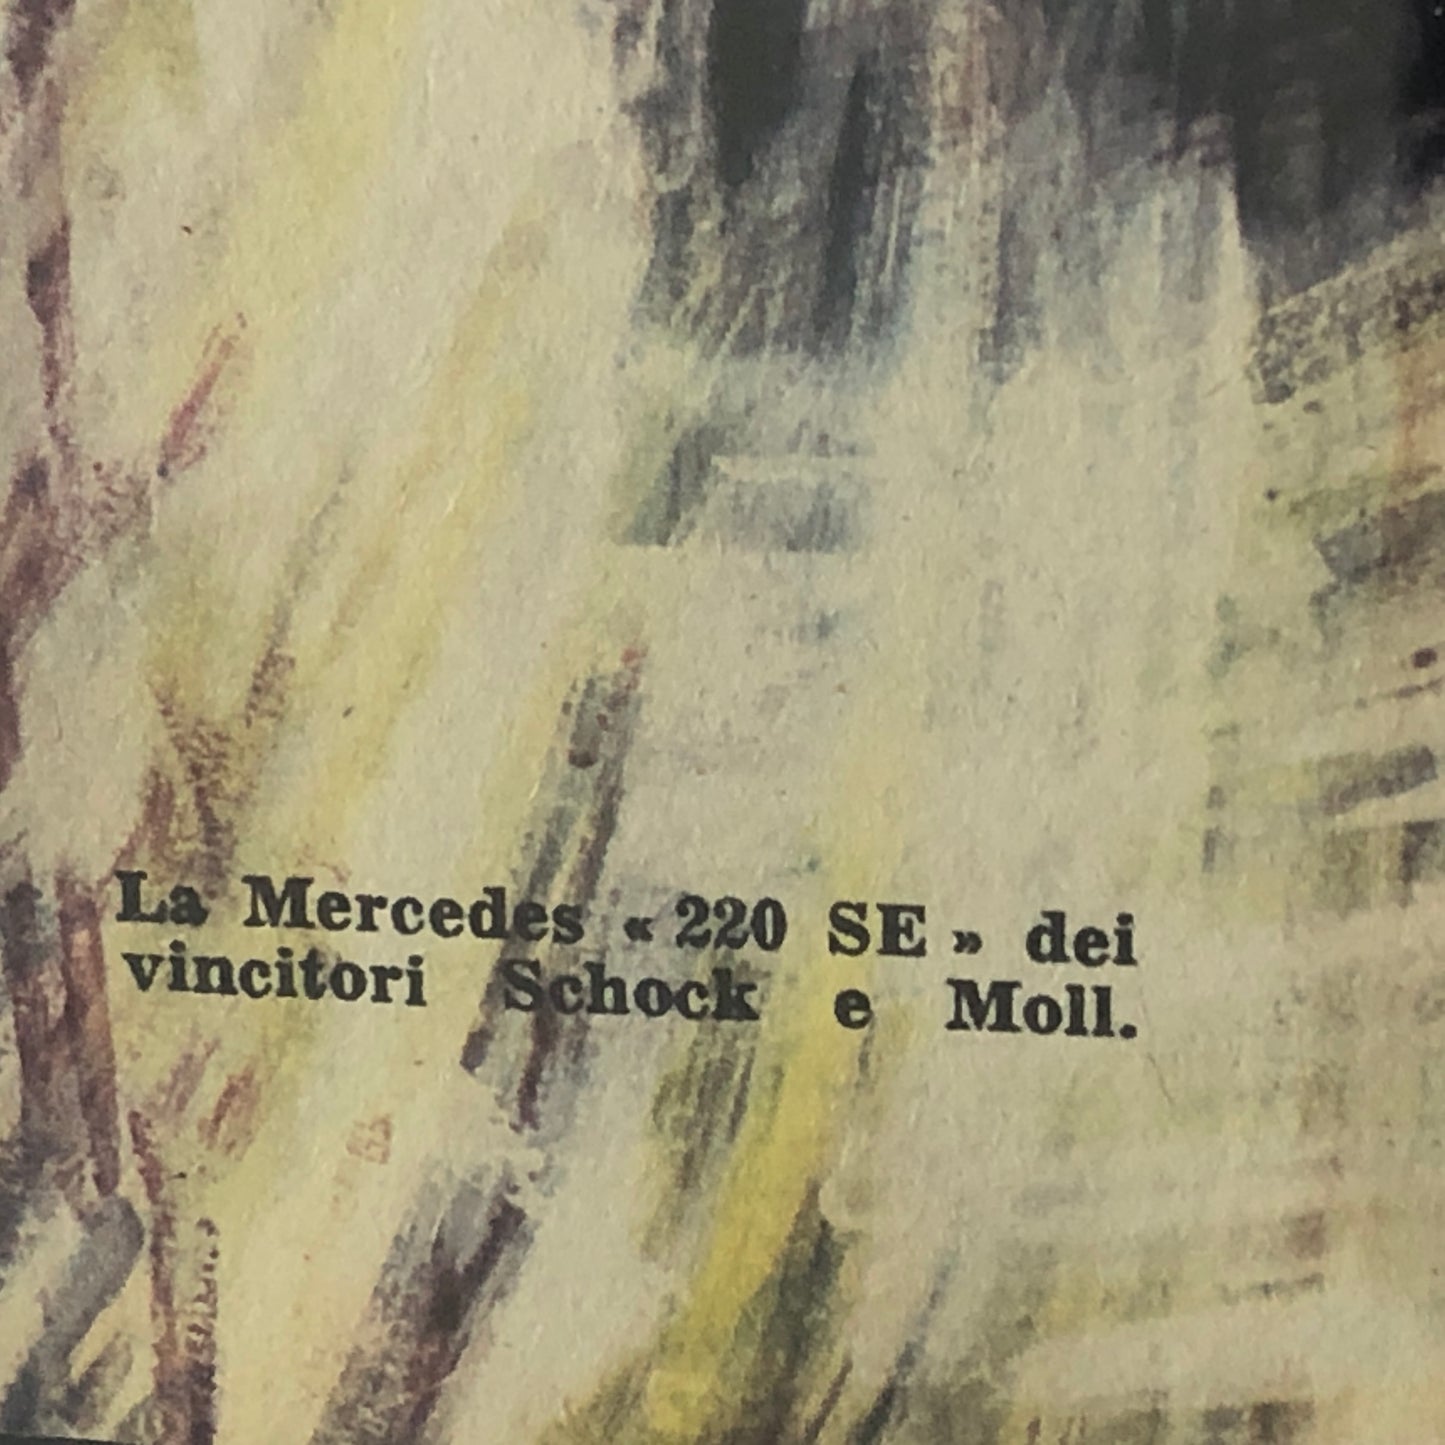 Mercedes-Benz, Monte Carlo Rally Victory Illustration Year 1960 Mercedes-Benz 220 SE of Walter Schock and Rolf Moll